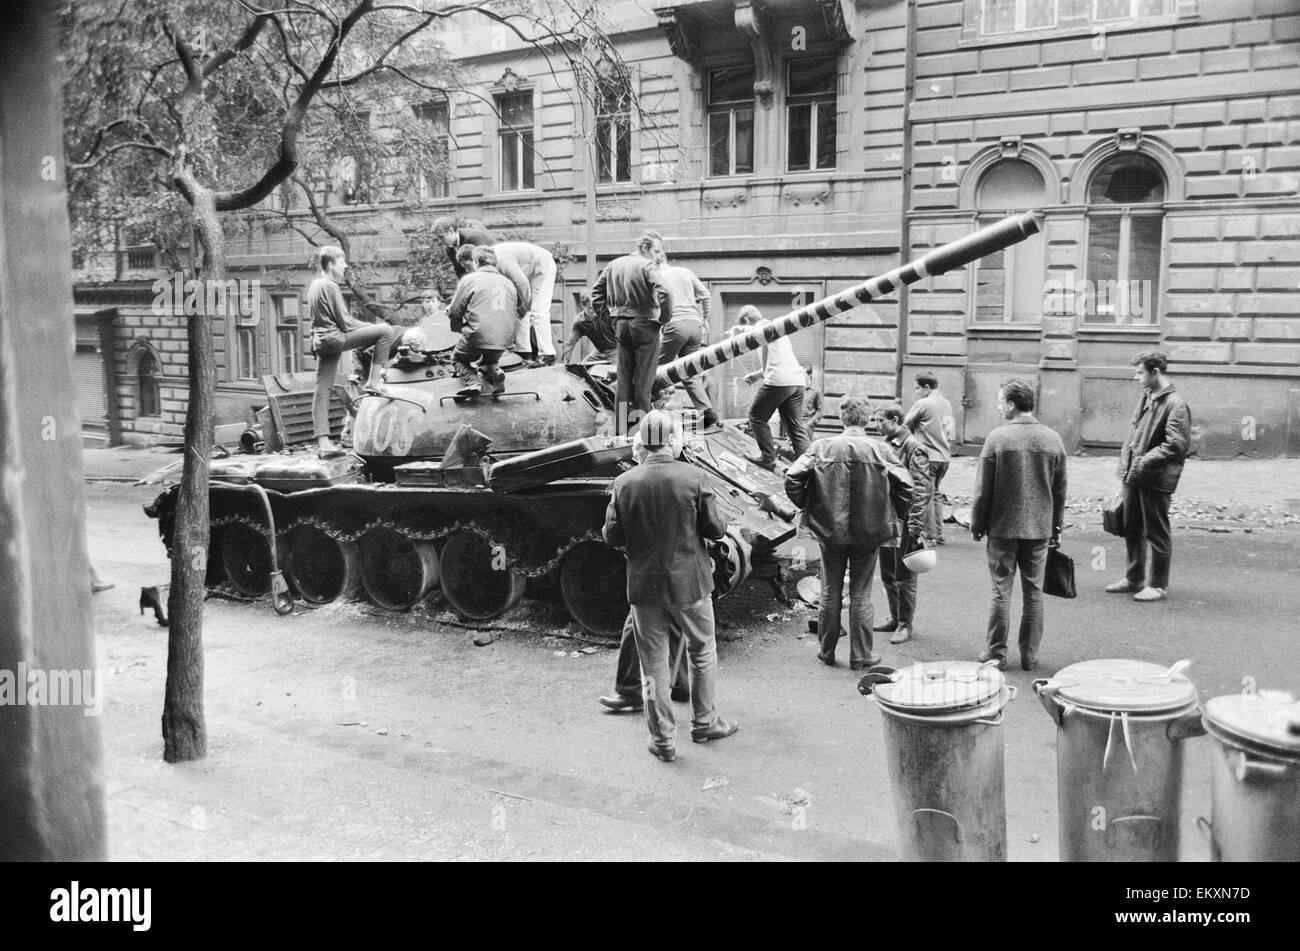 Prague, Czechoslovakia. End of the Prague Spring, a period of political liberalization in Czechoslovakia during the era of its domination by the Soviet Union after World War II. Czech children playing on a burnt out Russian tank. August 1968. Stock Photo